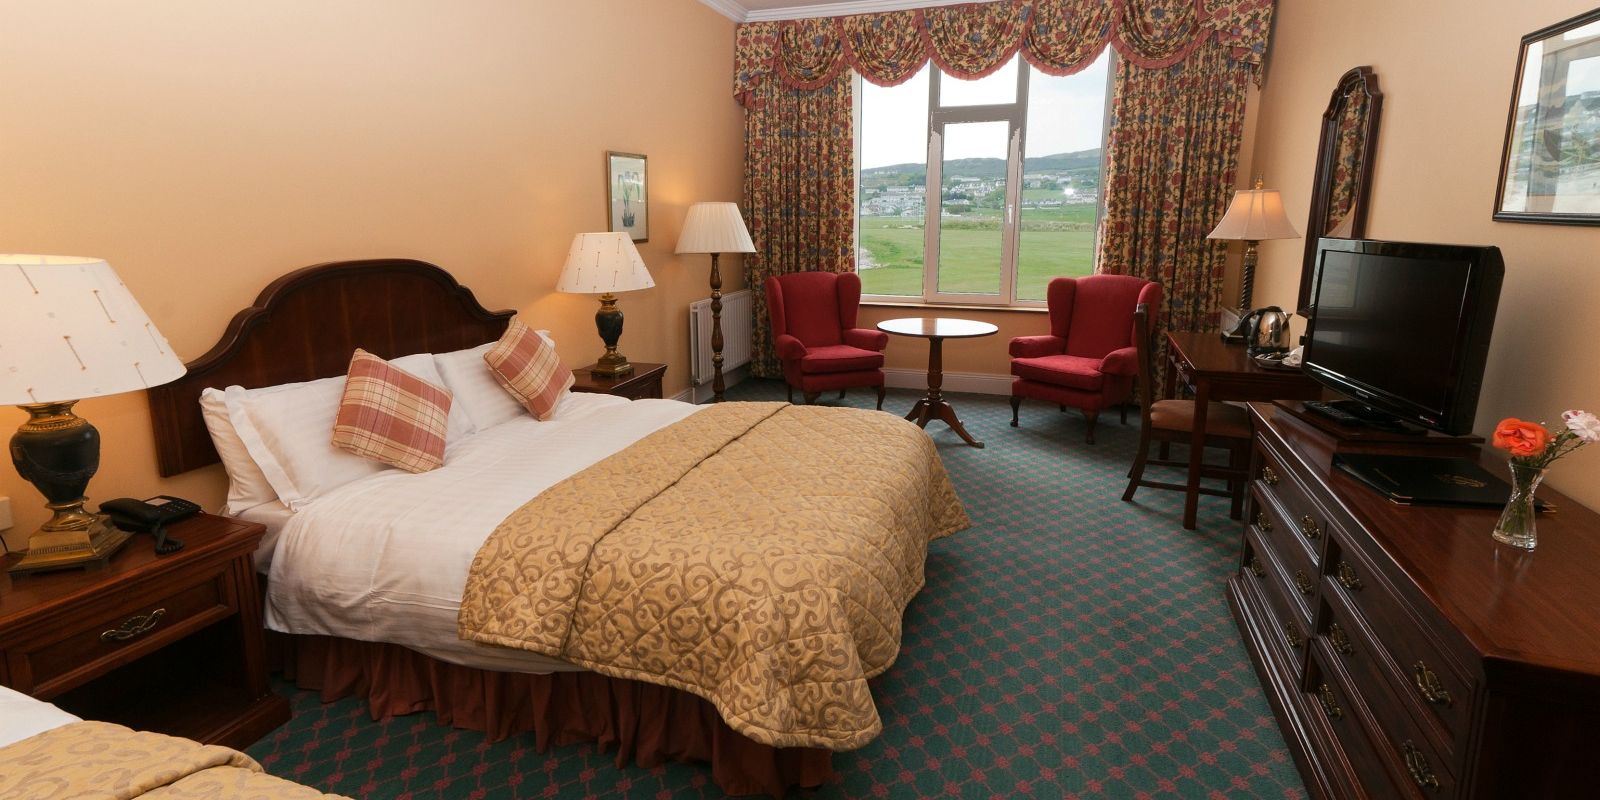 Push bedding and cosy furniture adds comfort to Deluxe Rooms at Rosapenna Golf Resort, Ireland